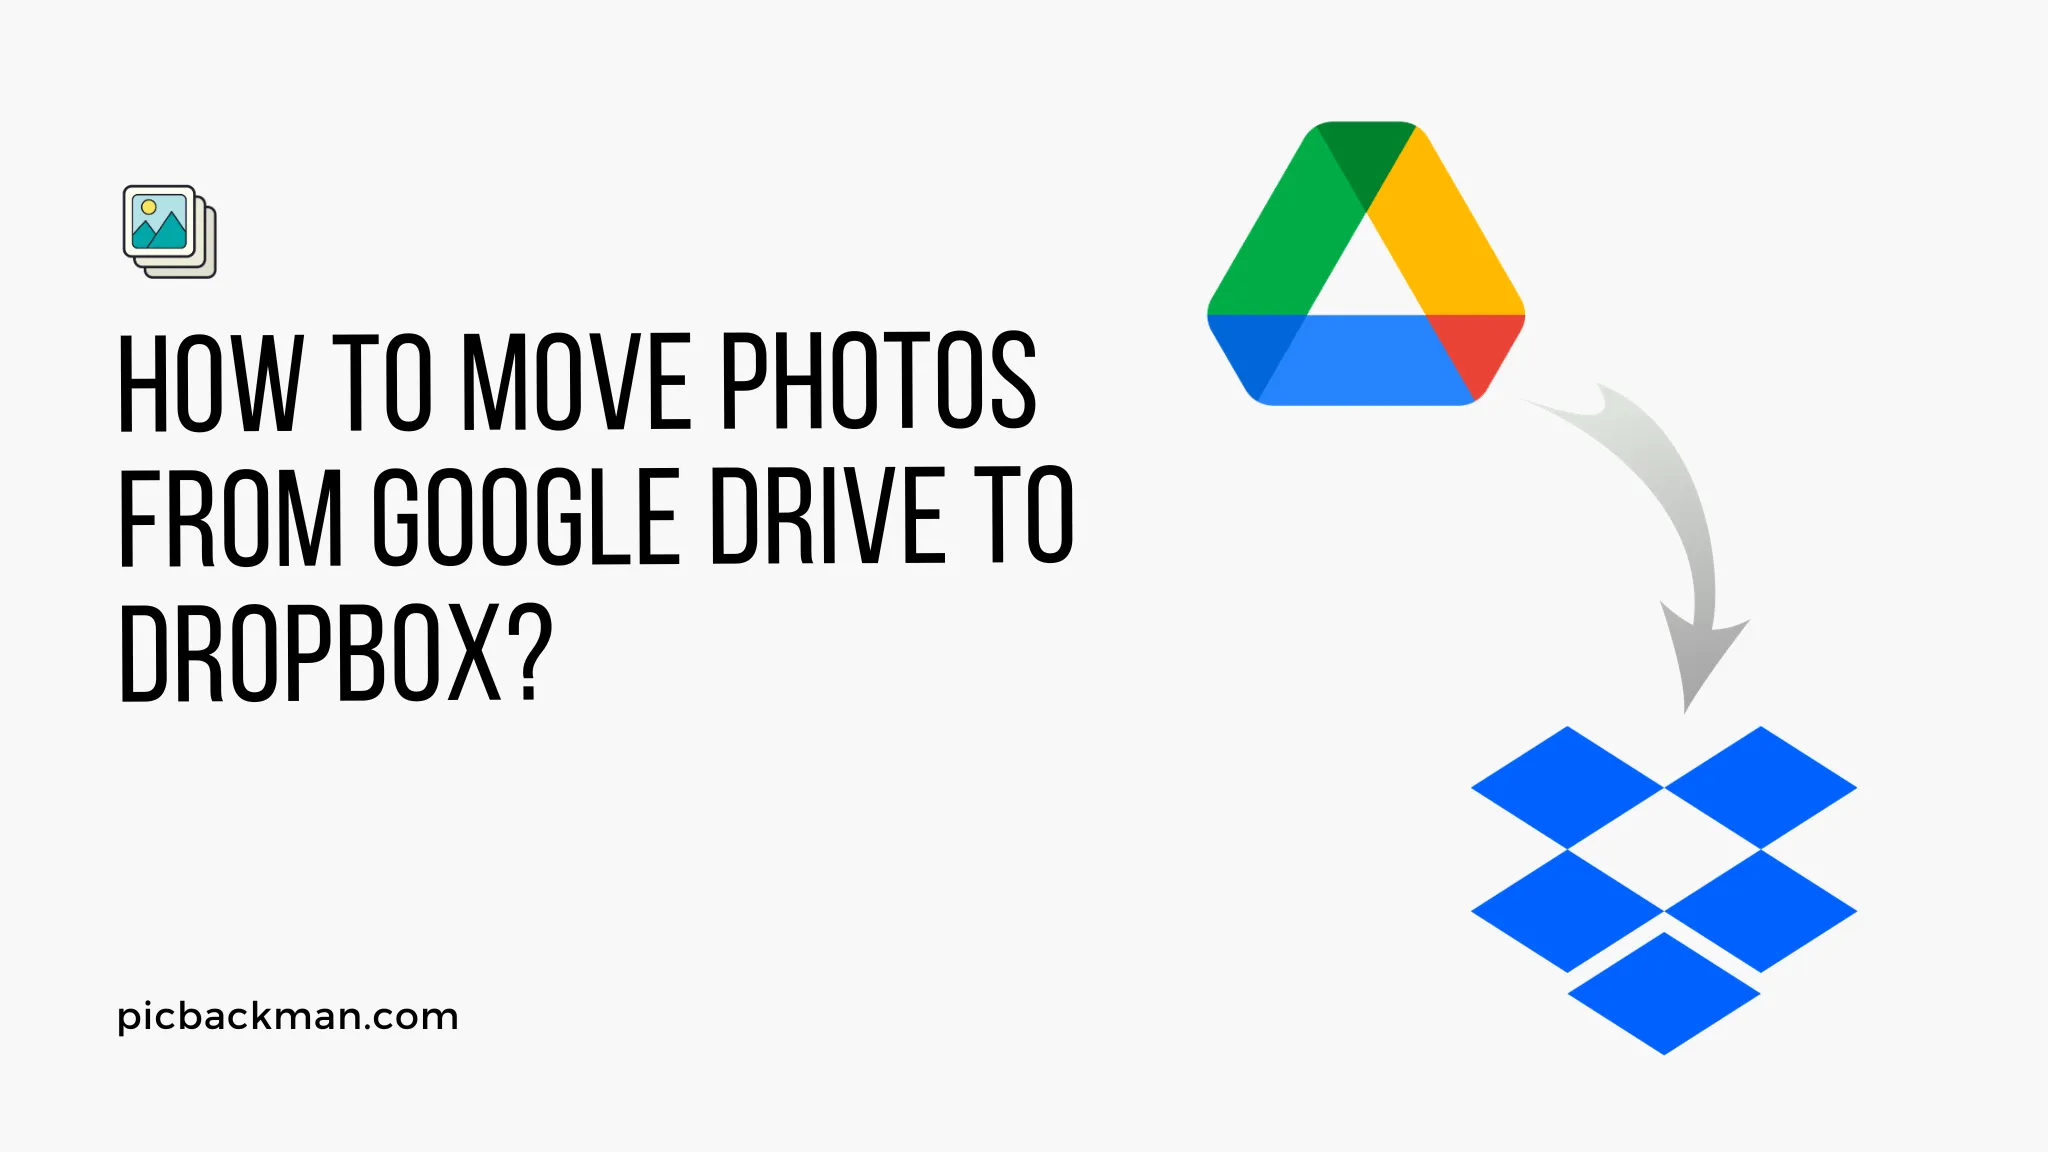 How to move photos from Google Drive to Dropbox?